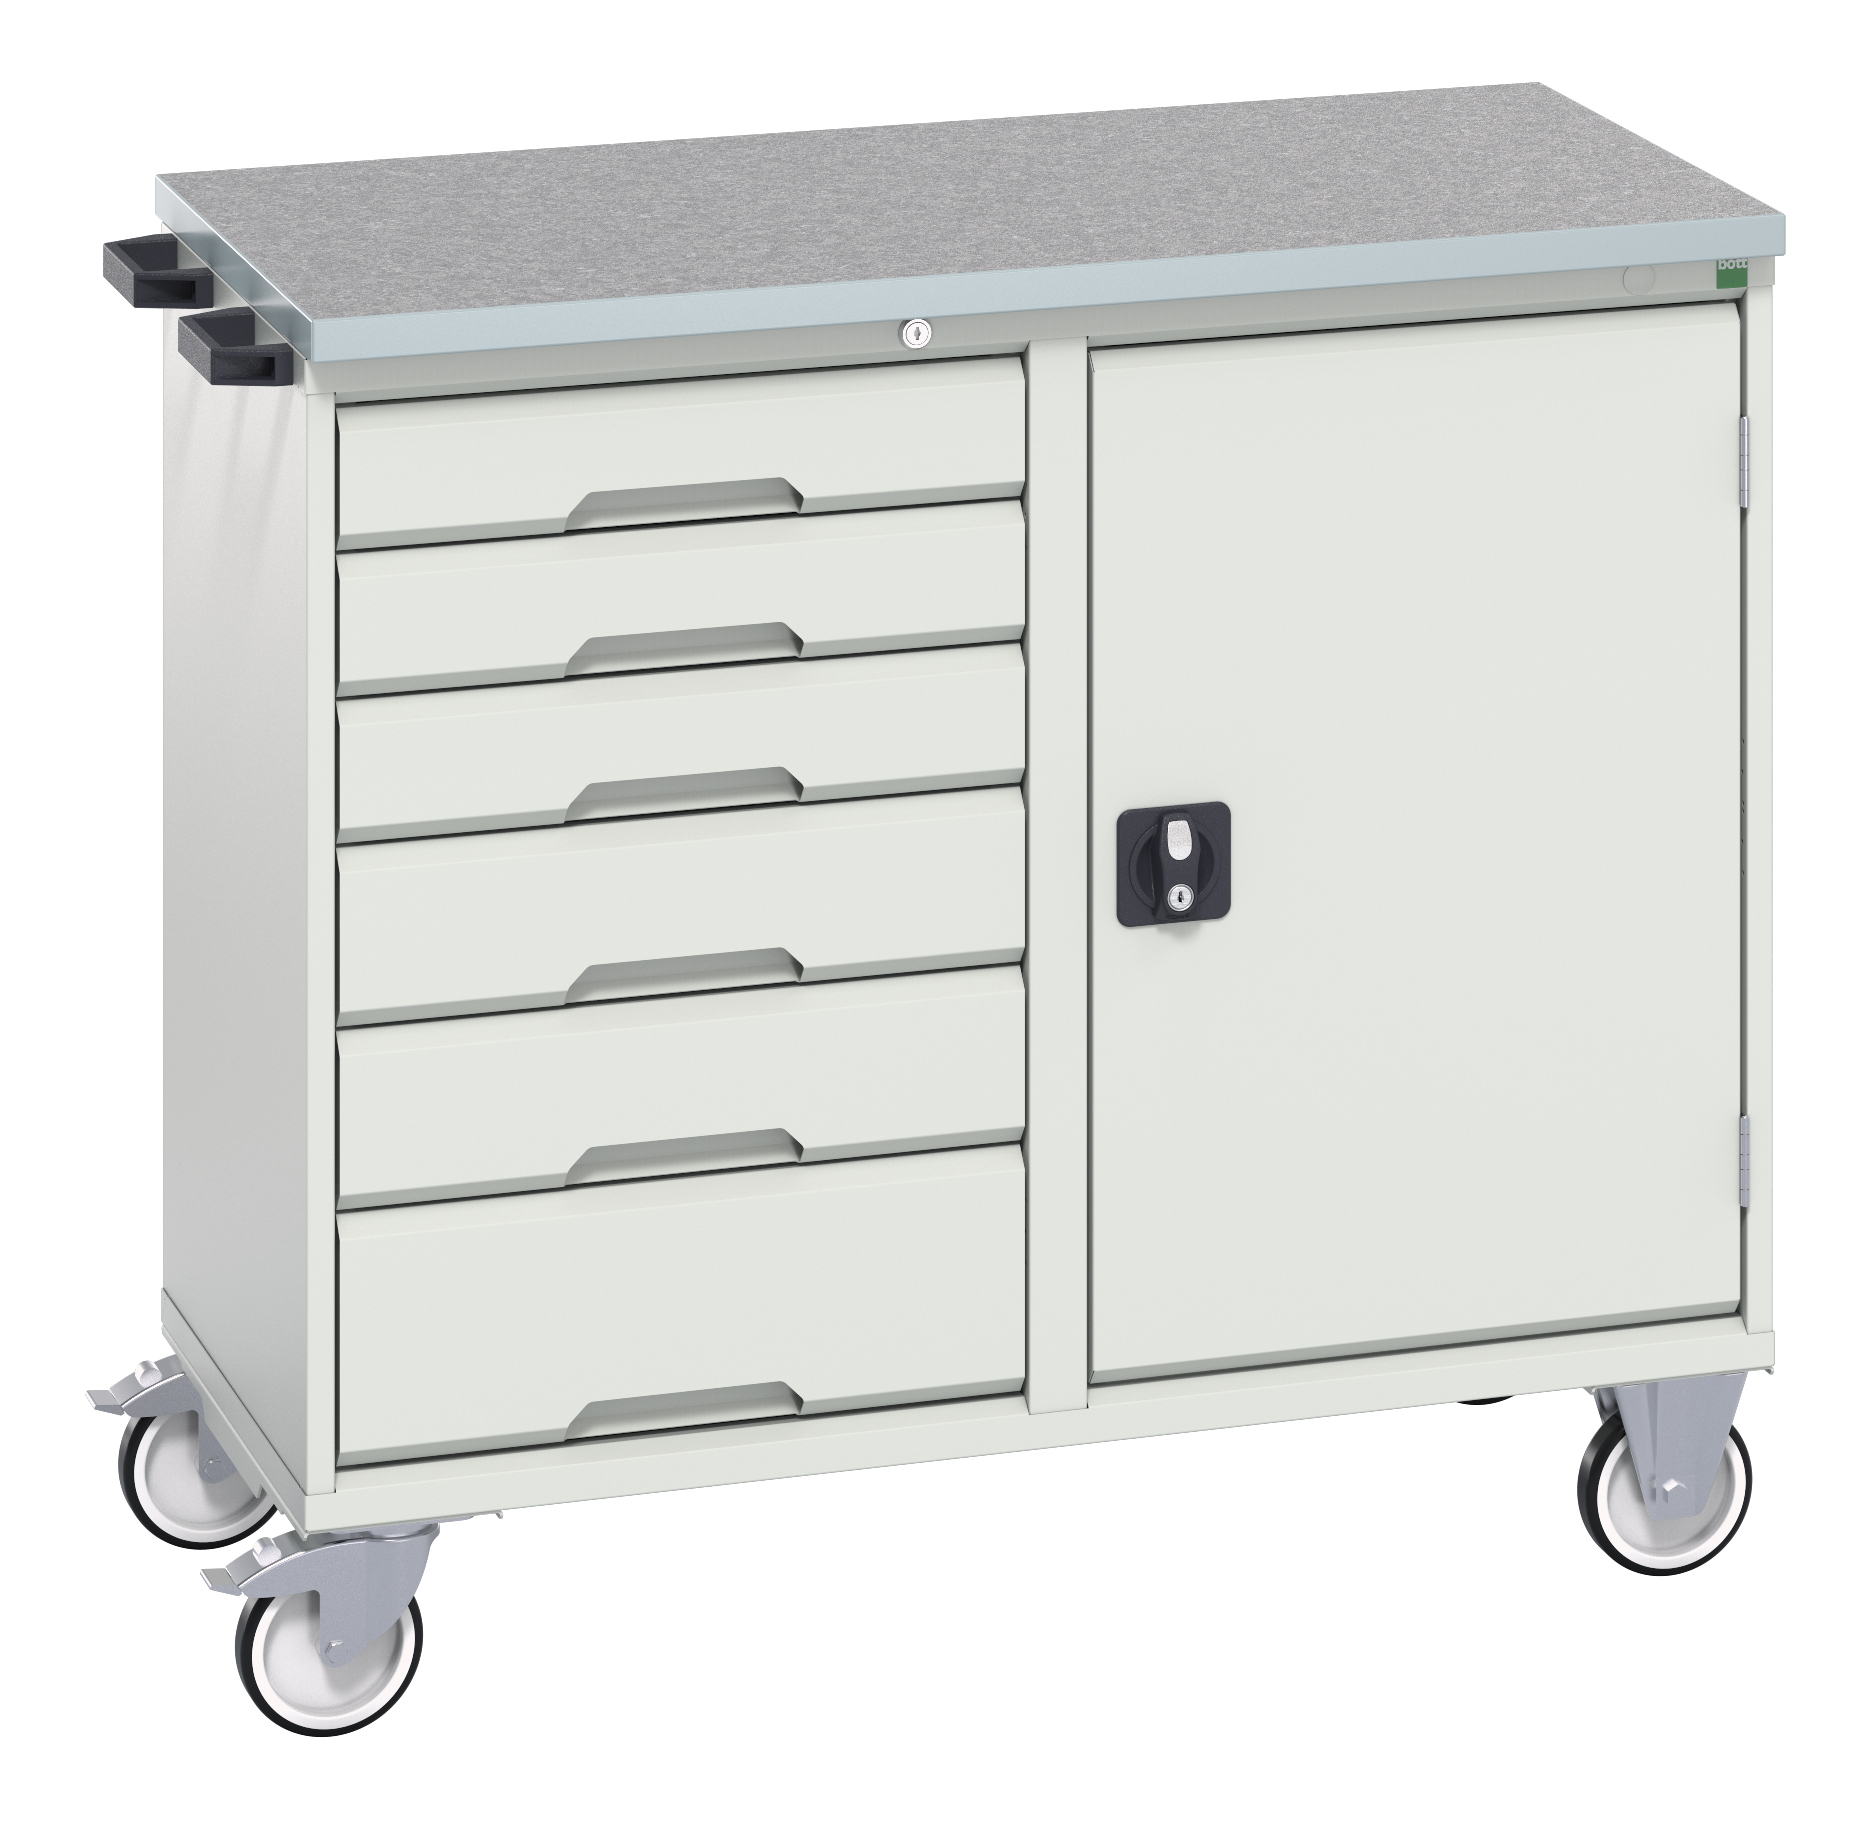 Bott Verso Maintenance Trolley With 6 Drawers / Cupboard & Lino Top - 16927123.16